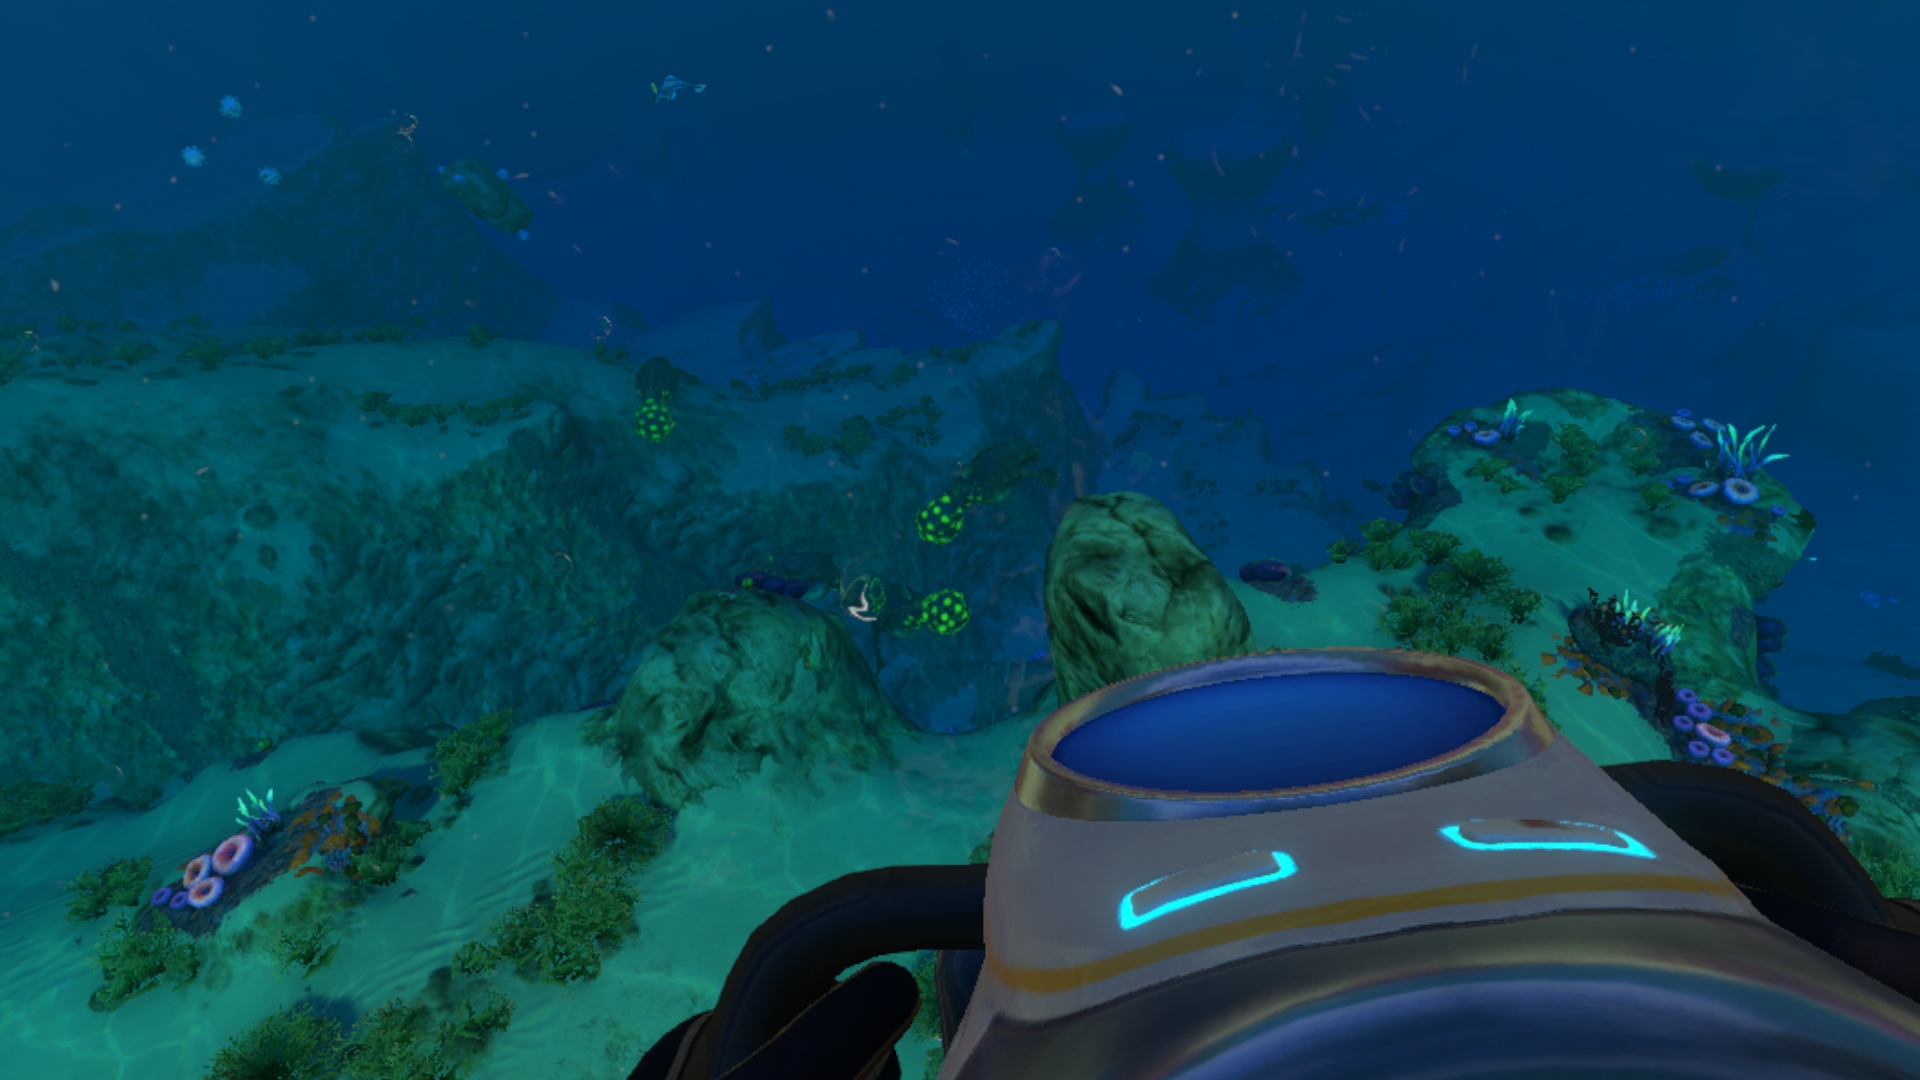 subnautica vr max settings requirements